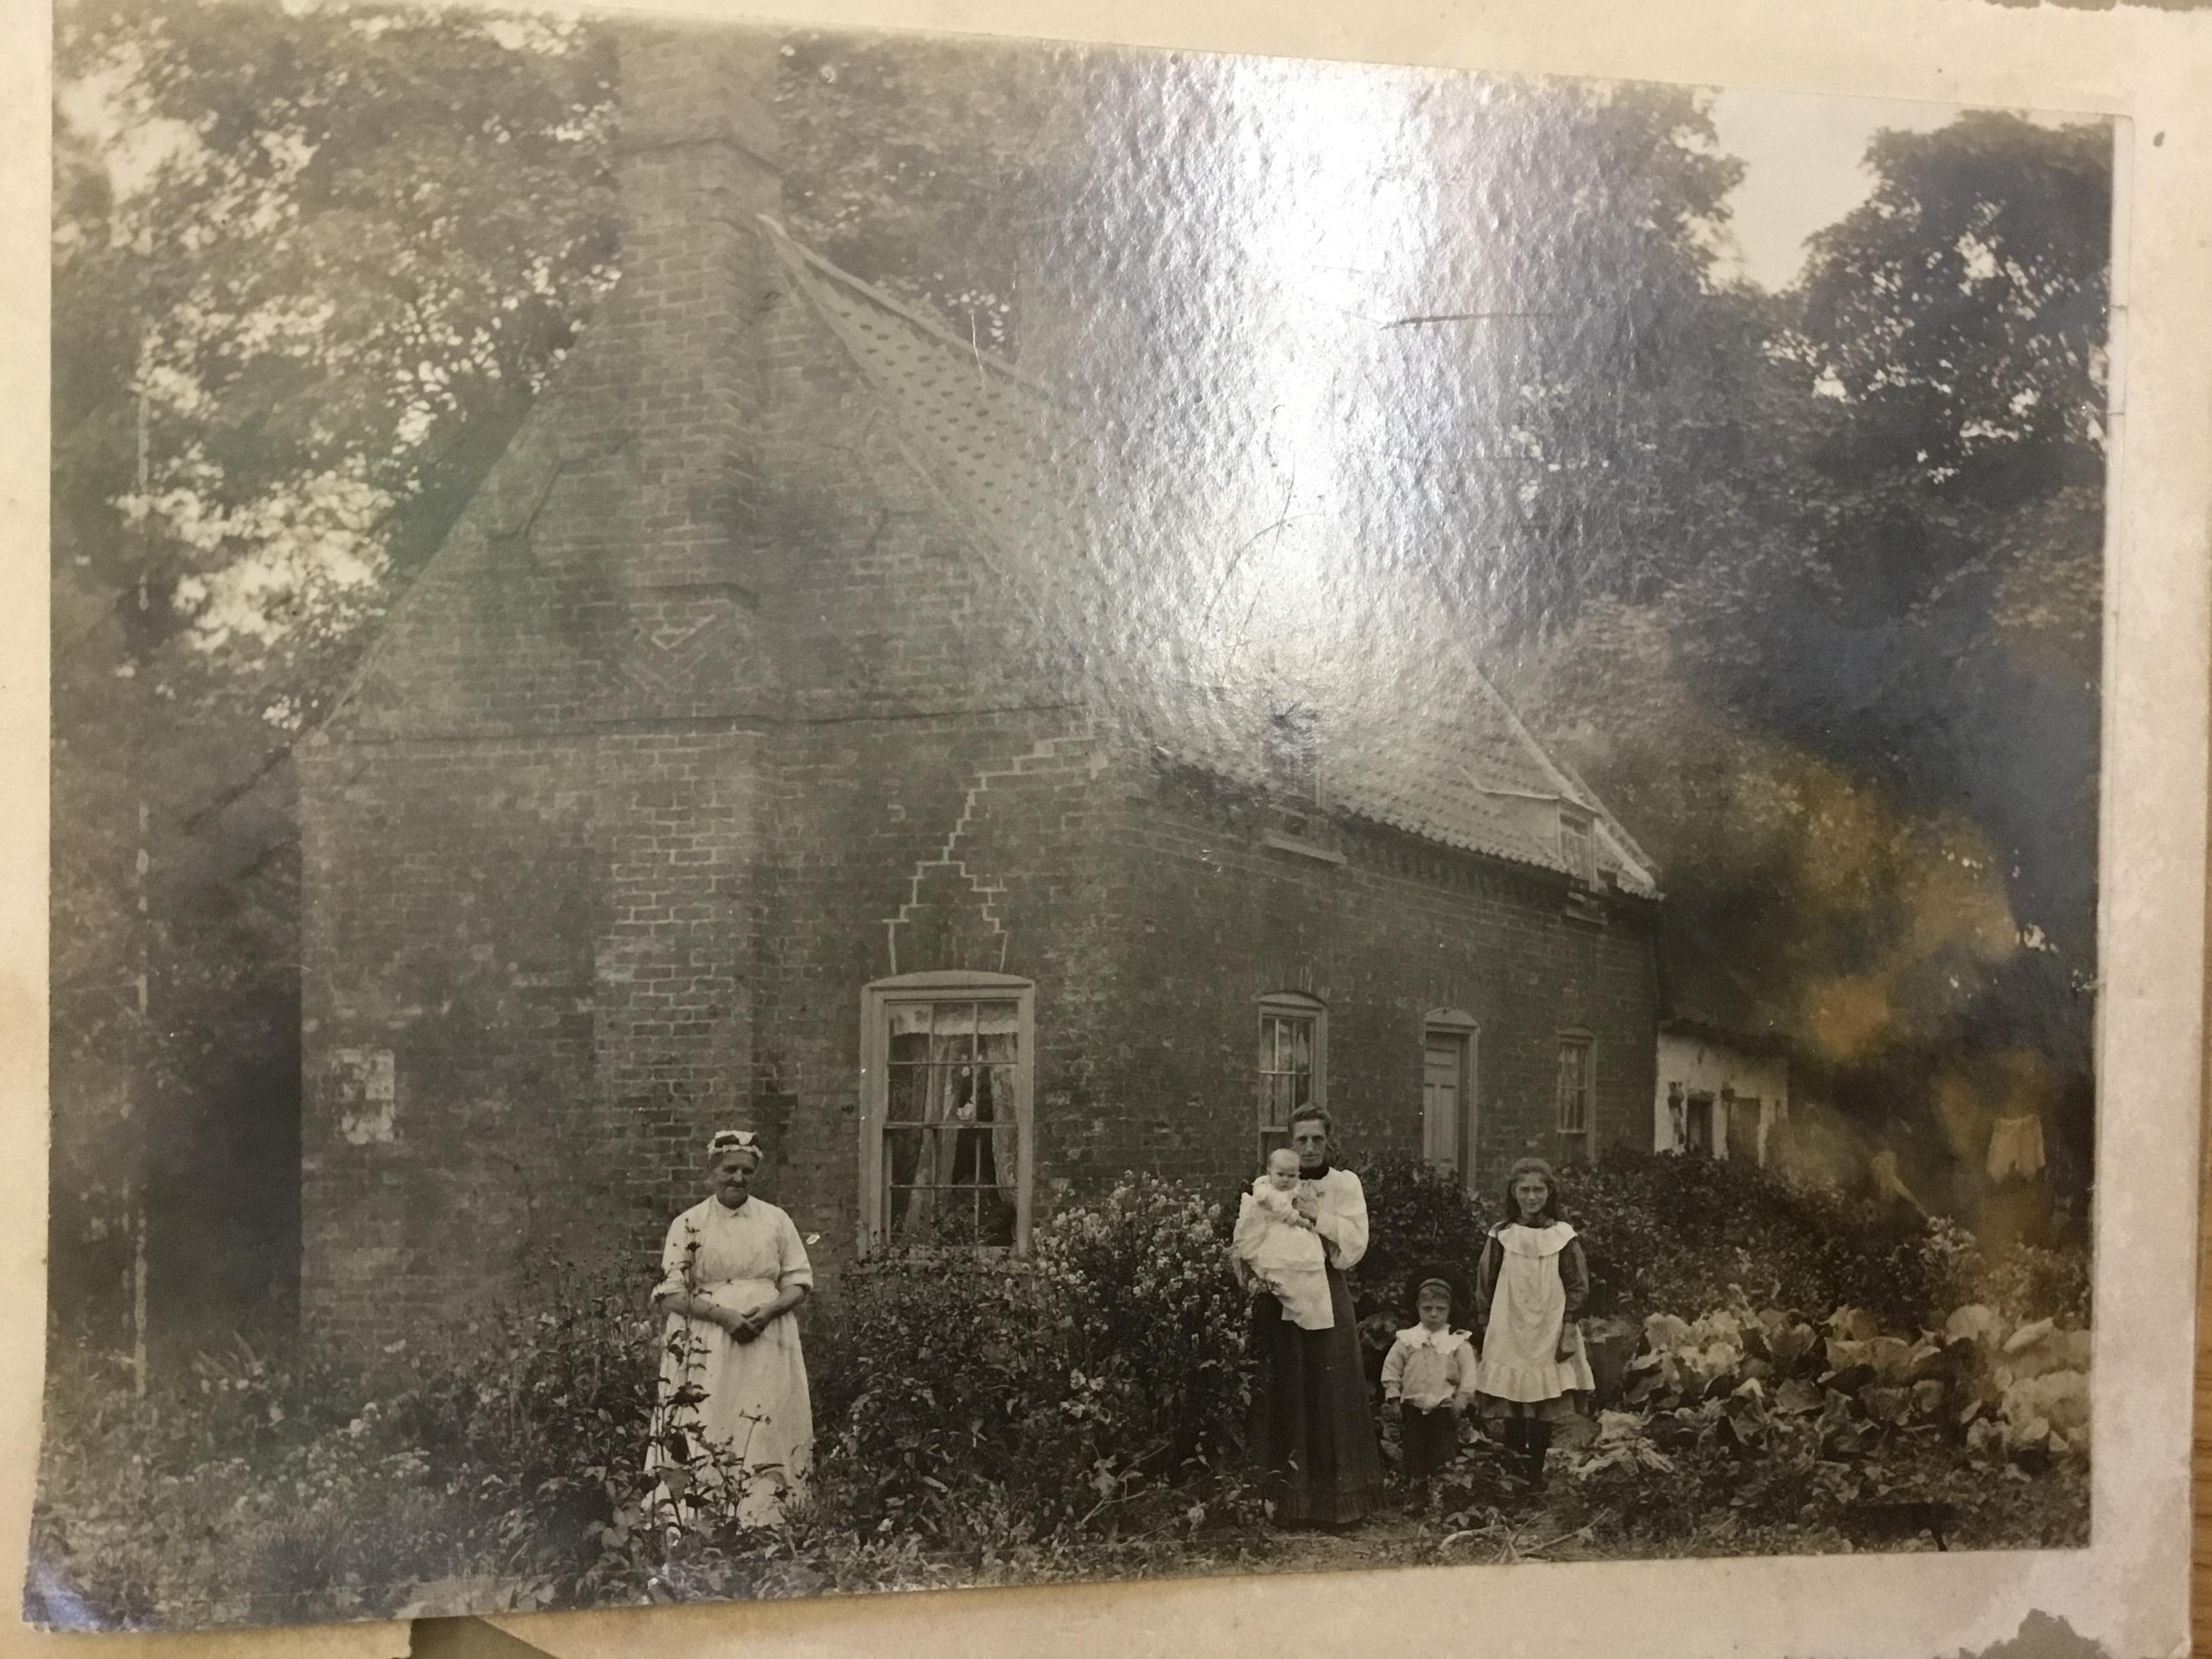 Residents outside their house in East Keal, probably Victorian times